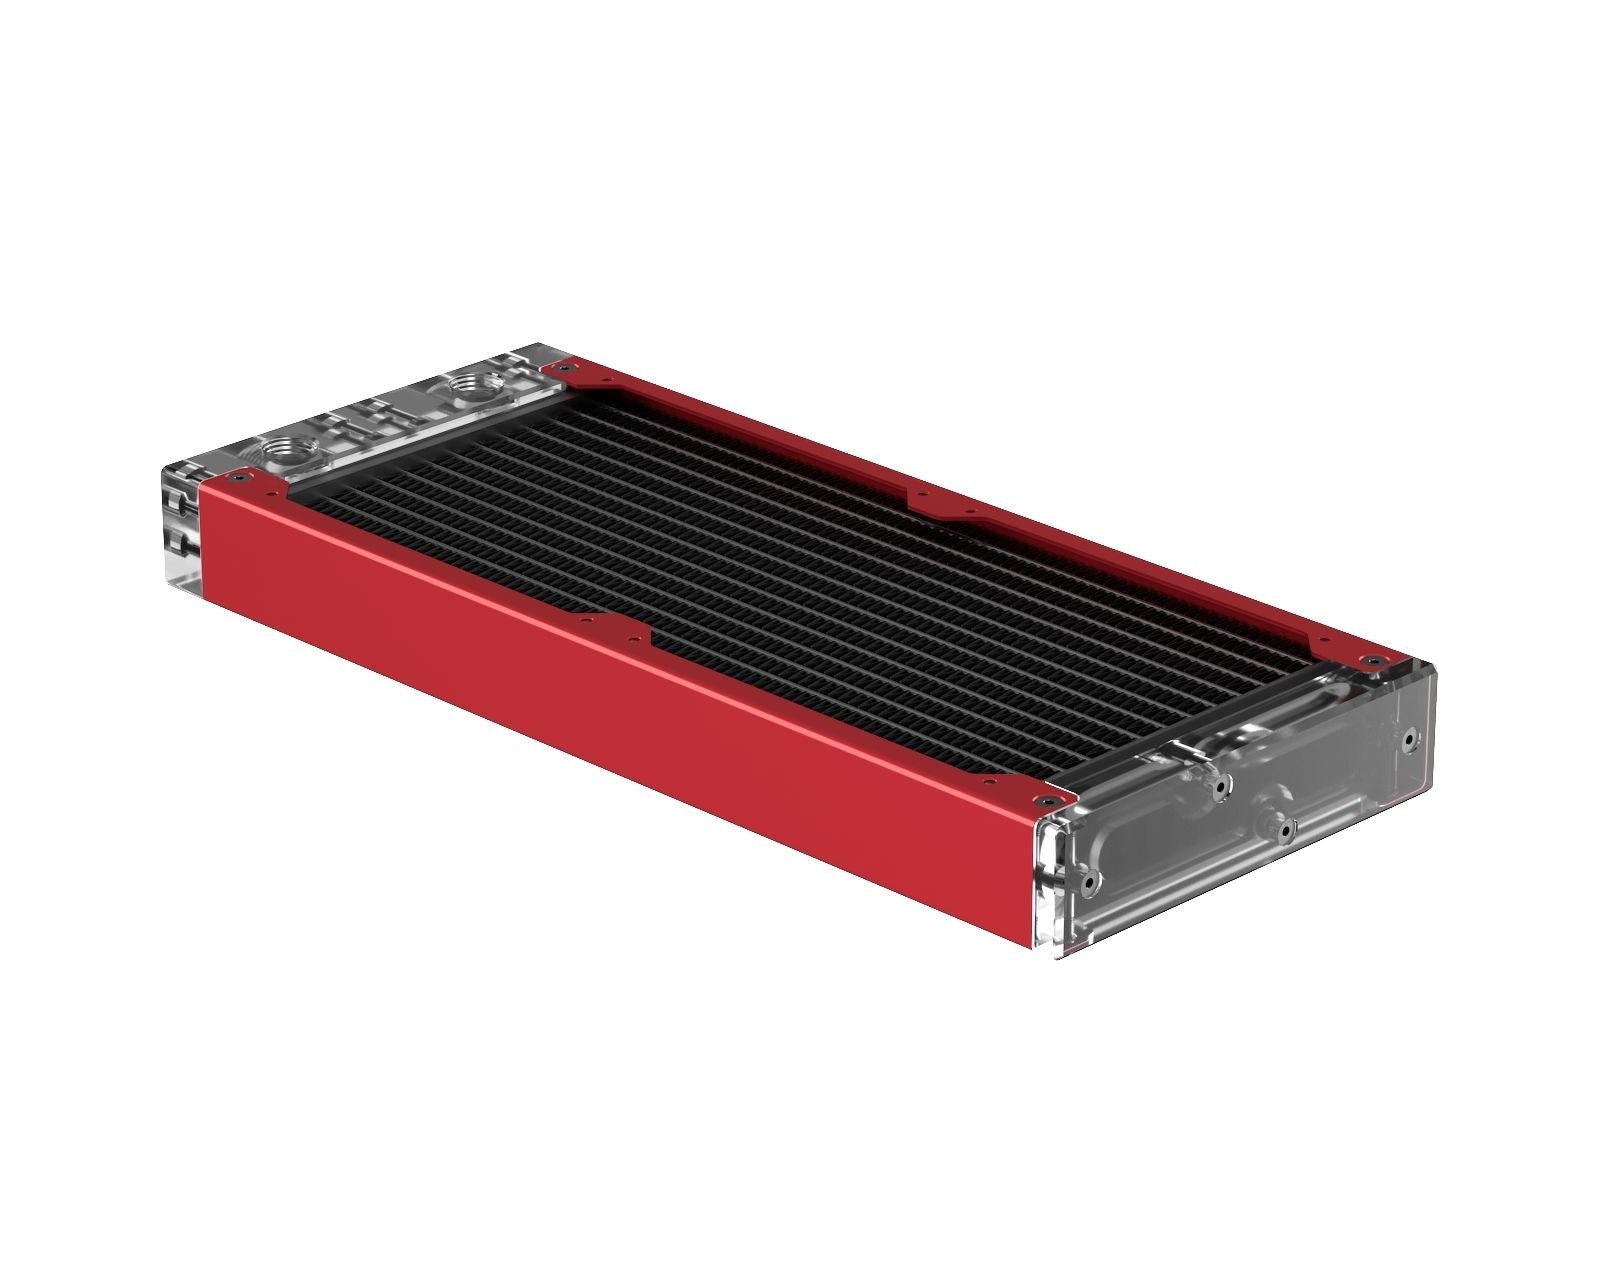 PrimoChill 240SL (30mm) EXIMO Modular Radiator, Clear Acrylic, 2x120mm, Dual Fan (R-SL-A24) Available in 20+ Colors, Assembled in USA and Custom Watercooling Loop Ready - Candy Red